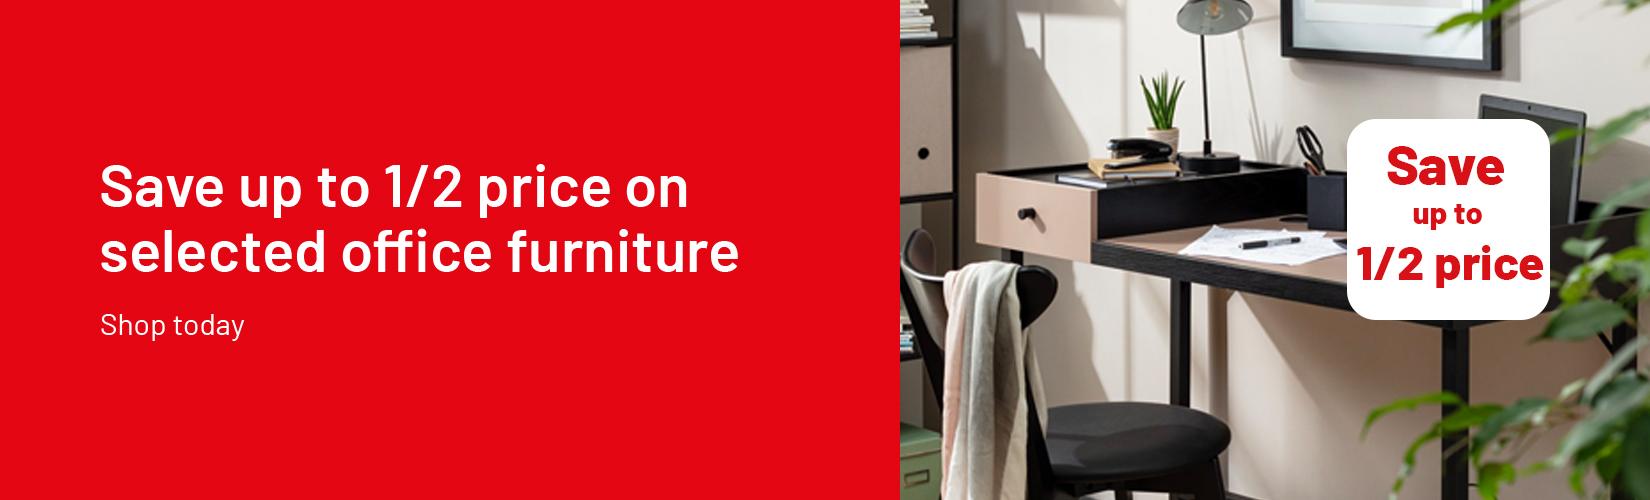 Save up to 1/2 on selected office furniture.